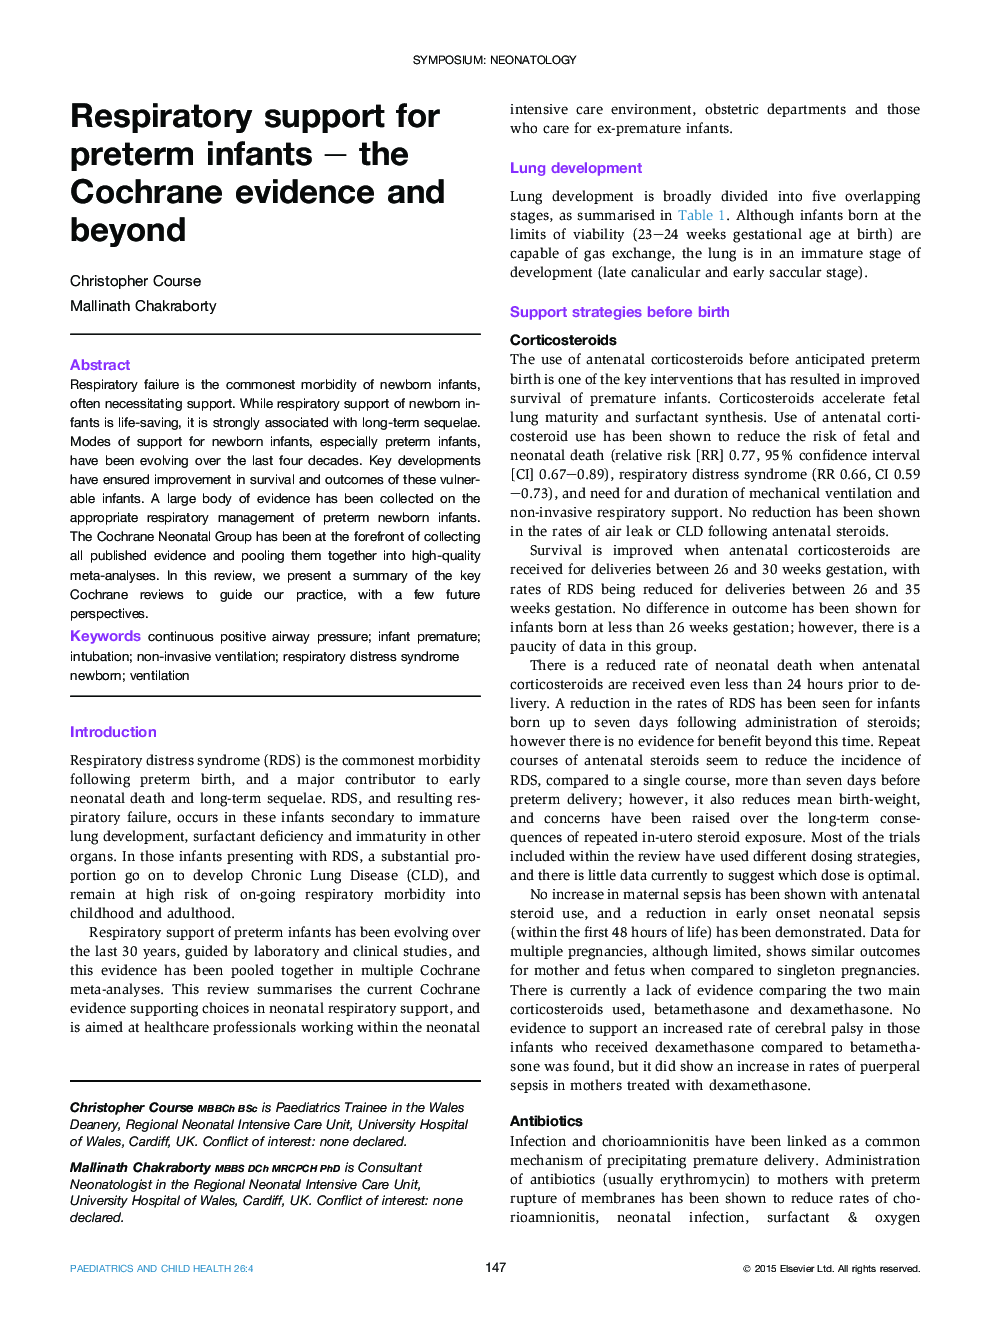 Respiratory support for preterm infants – the Cochrane evidence and beyond